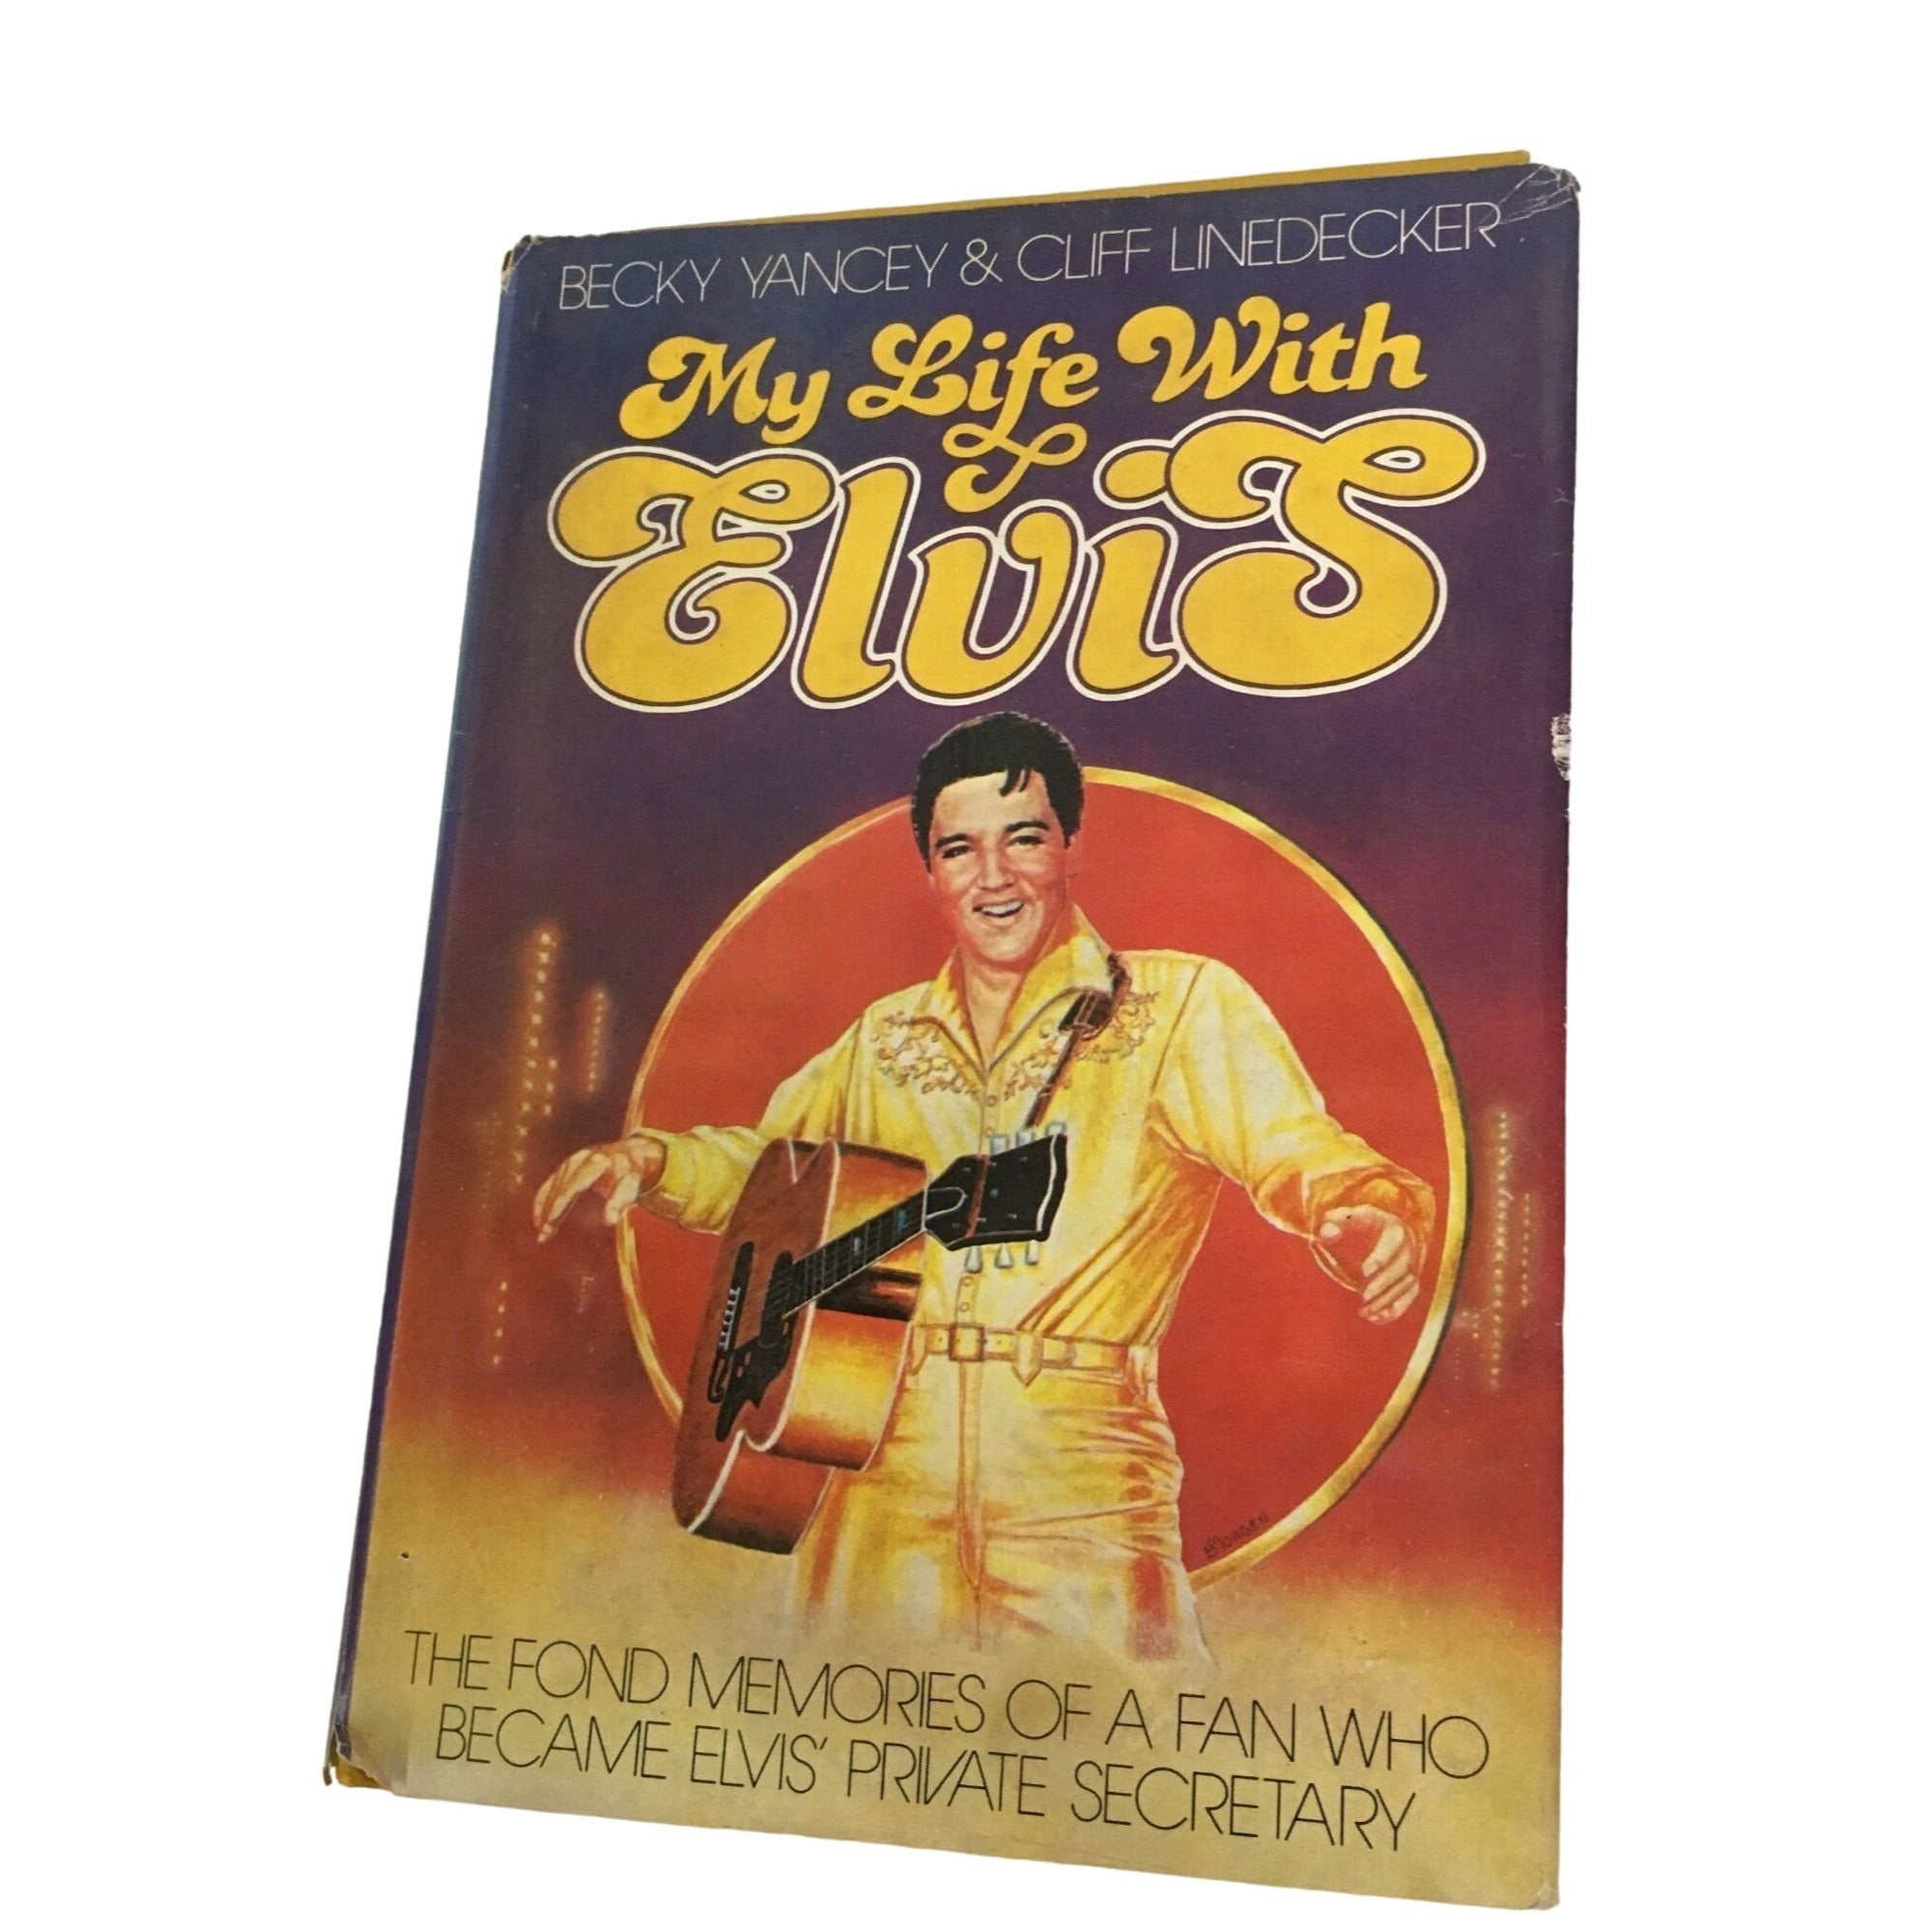 My Life With Elvis by Becky Yancy & Cliff Linedecker book